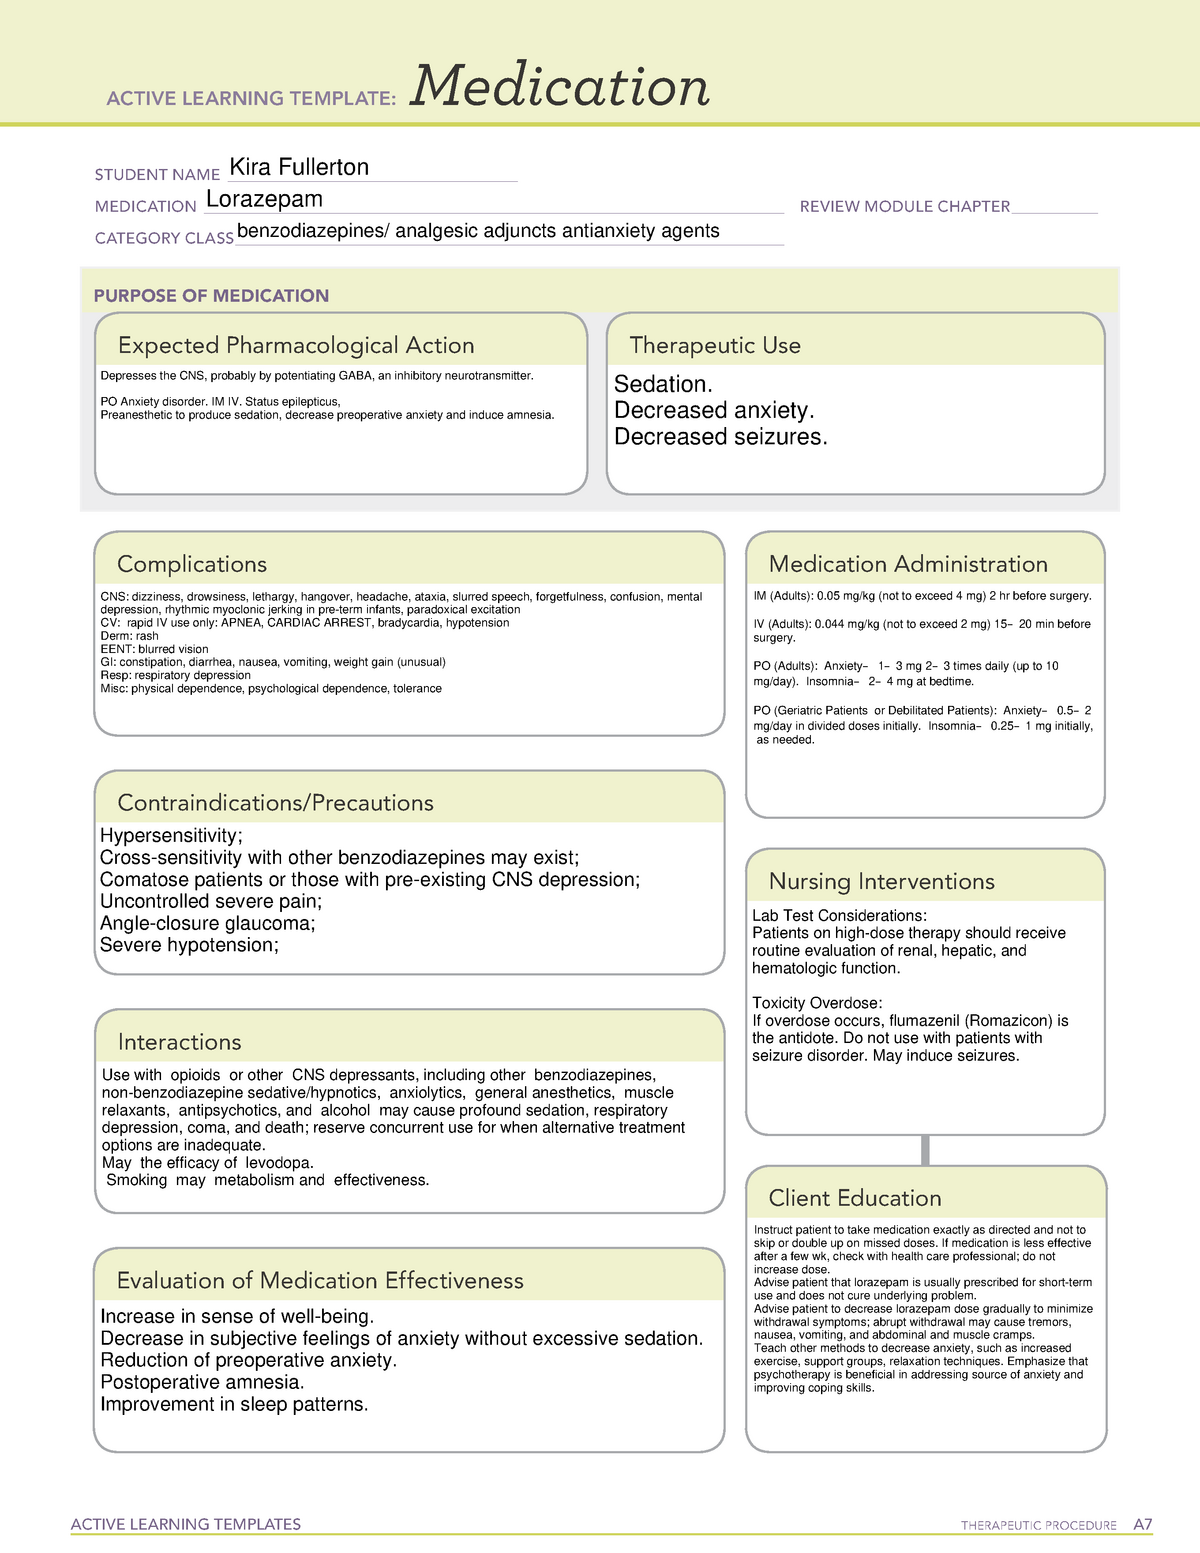 med-lorazepam-ati-medications-sheet-active-learning-templates